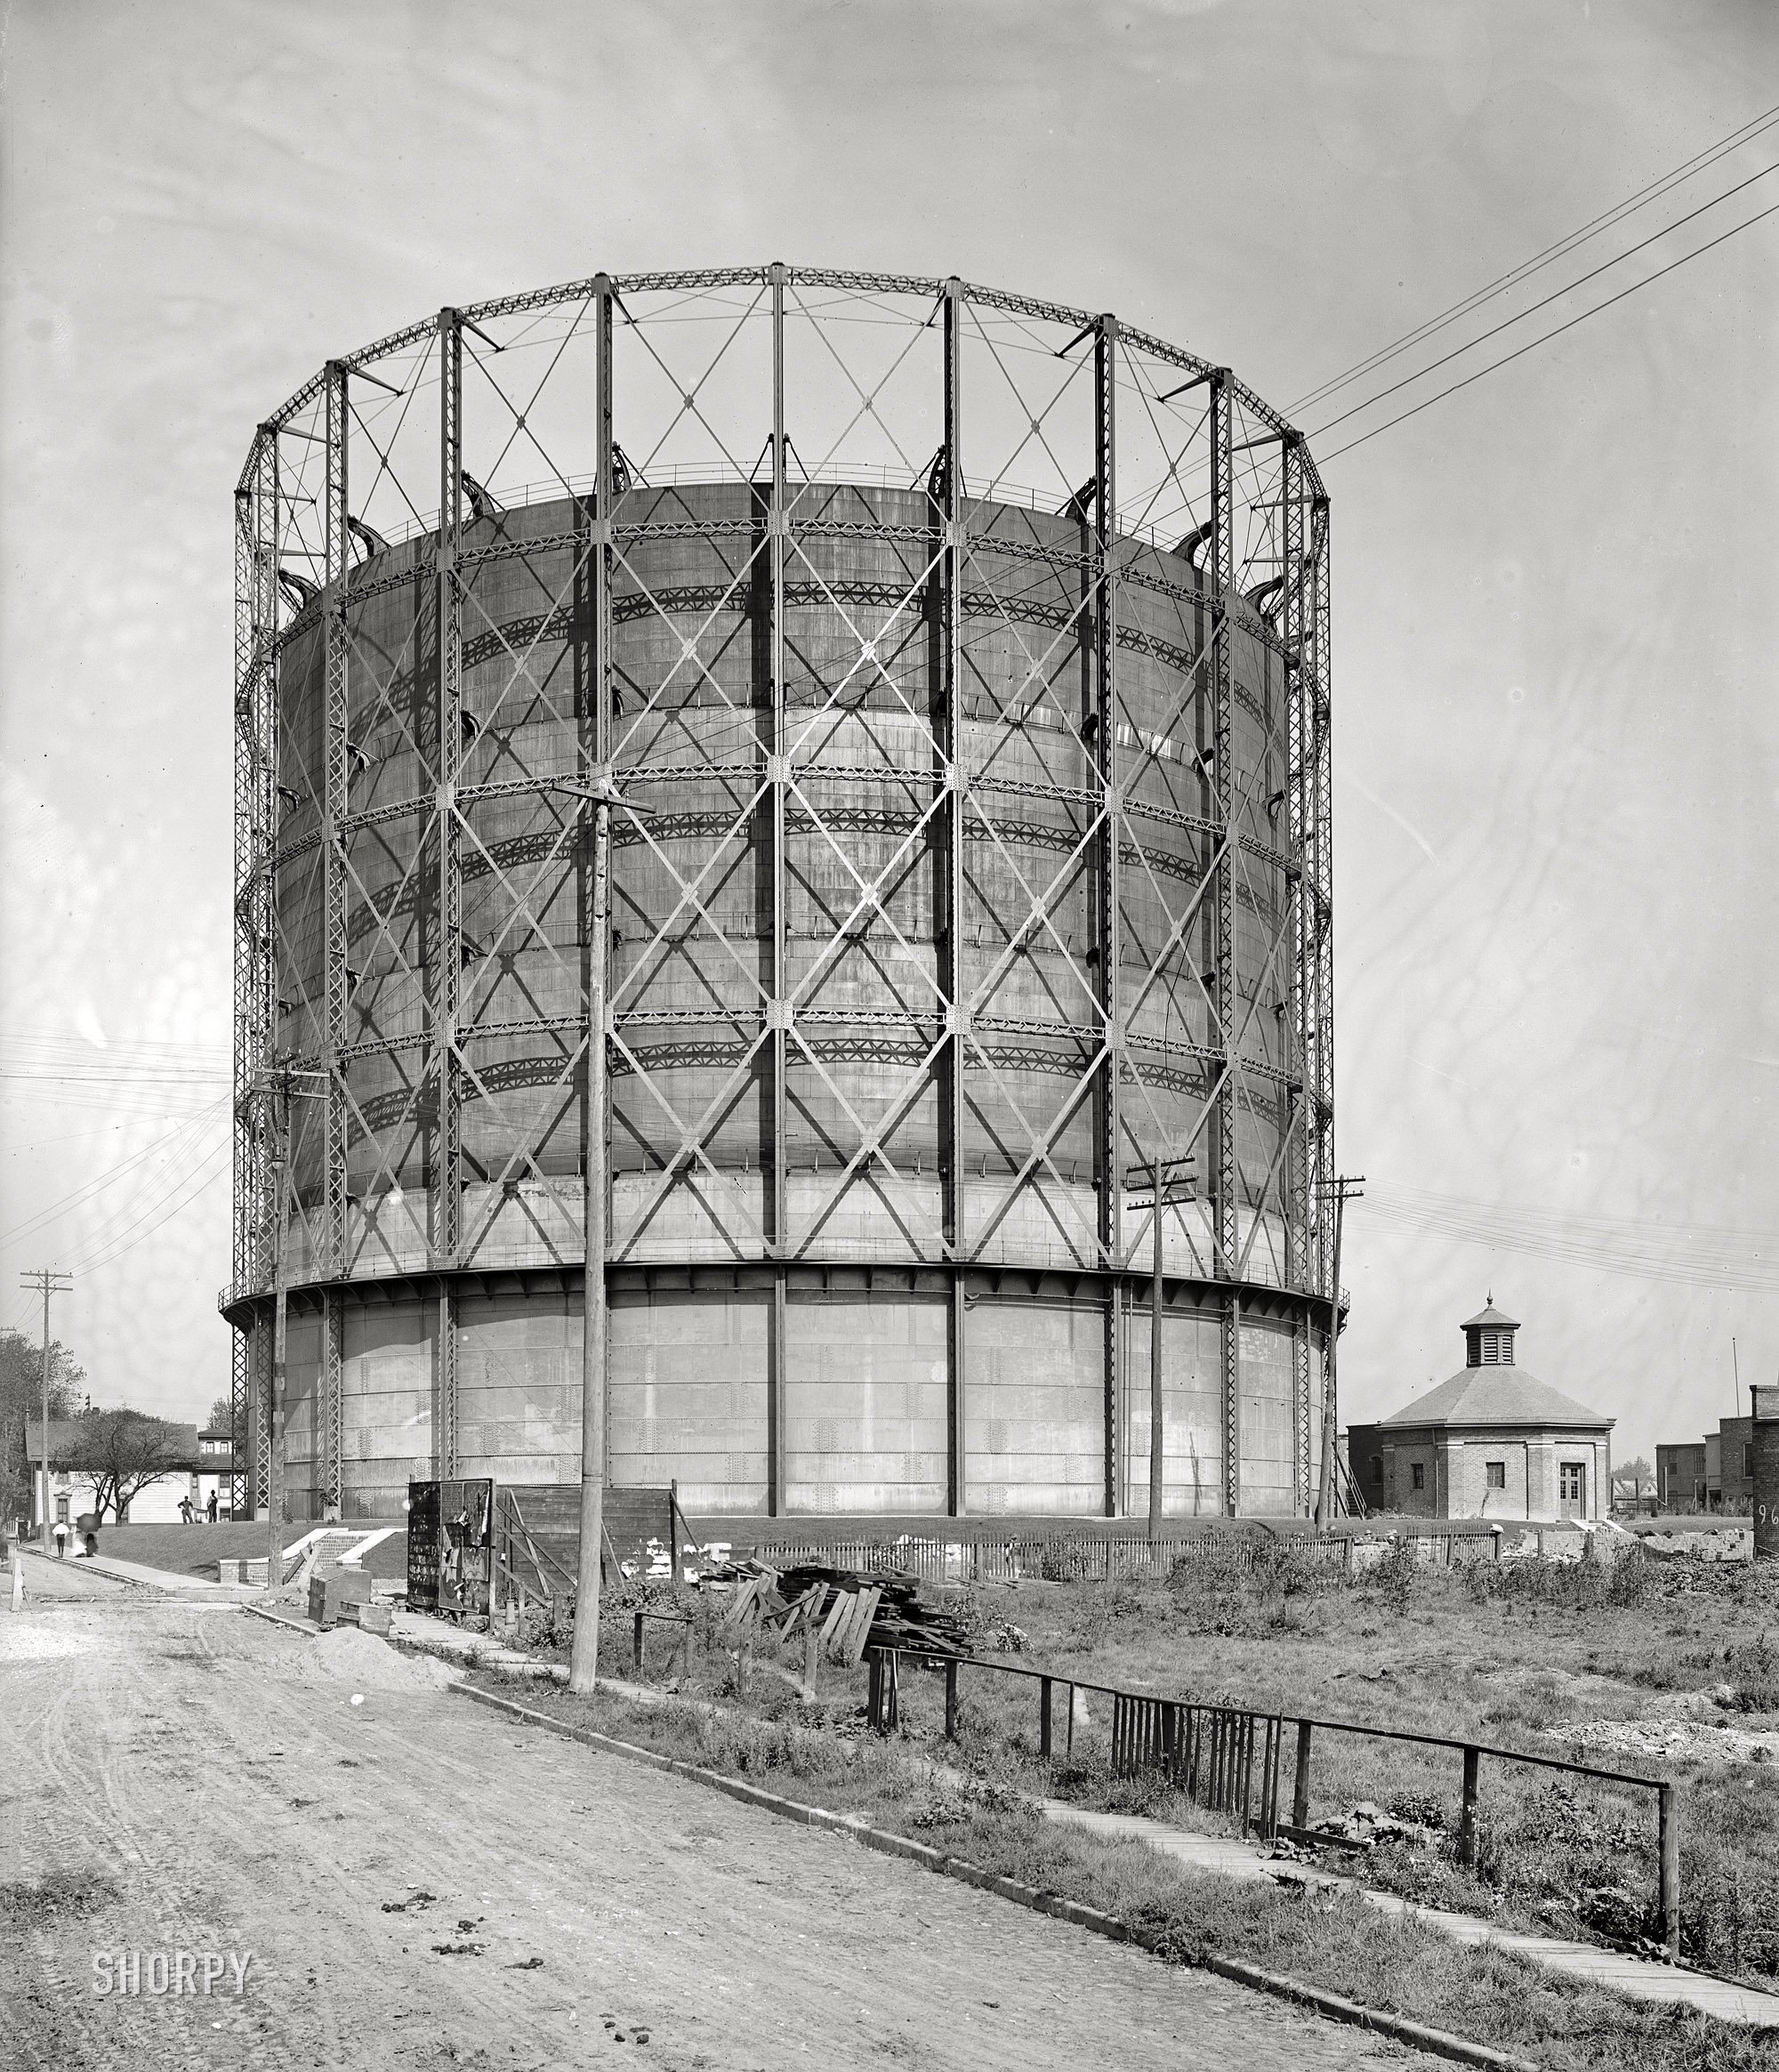 Circa 1905. "Gas holder, Detroit City Gas Company." A familiar sight from the era of "city gas," when municipalities had their own gas plants in the days before long-distance transmission of natural gas. The telescoping sections rose or fell as "illuminating gas," which was made by heating coal, was put into or removed from the holder. 8x10 glass negative. View full size.